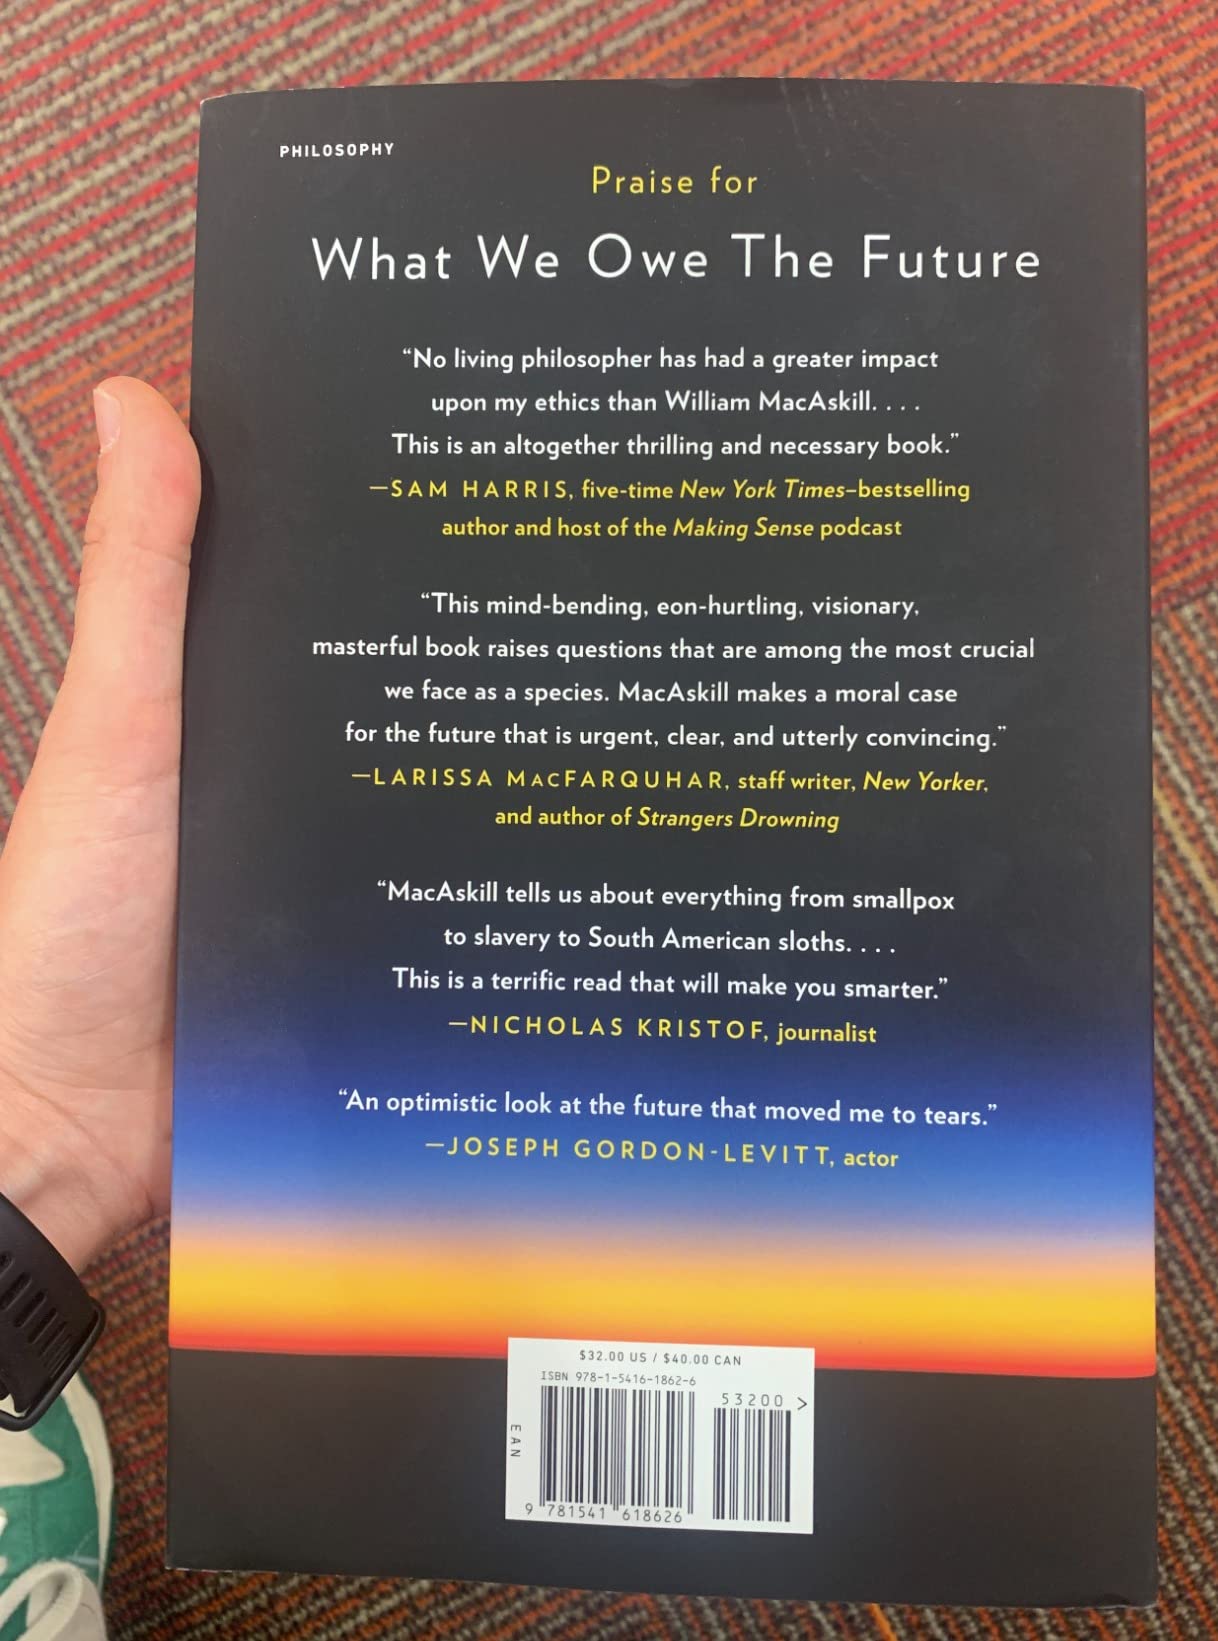 Amazingly thoughtful book for people who want to improve the world